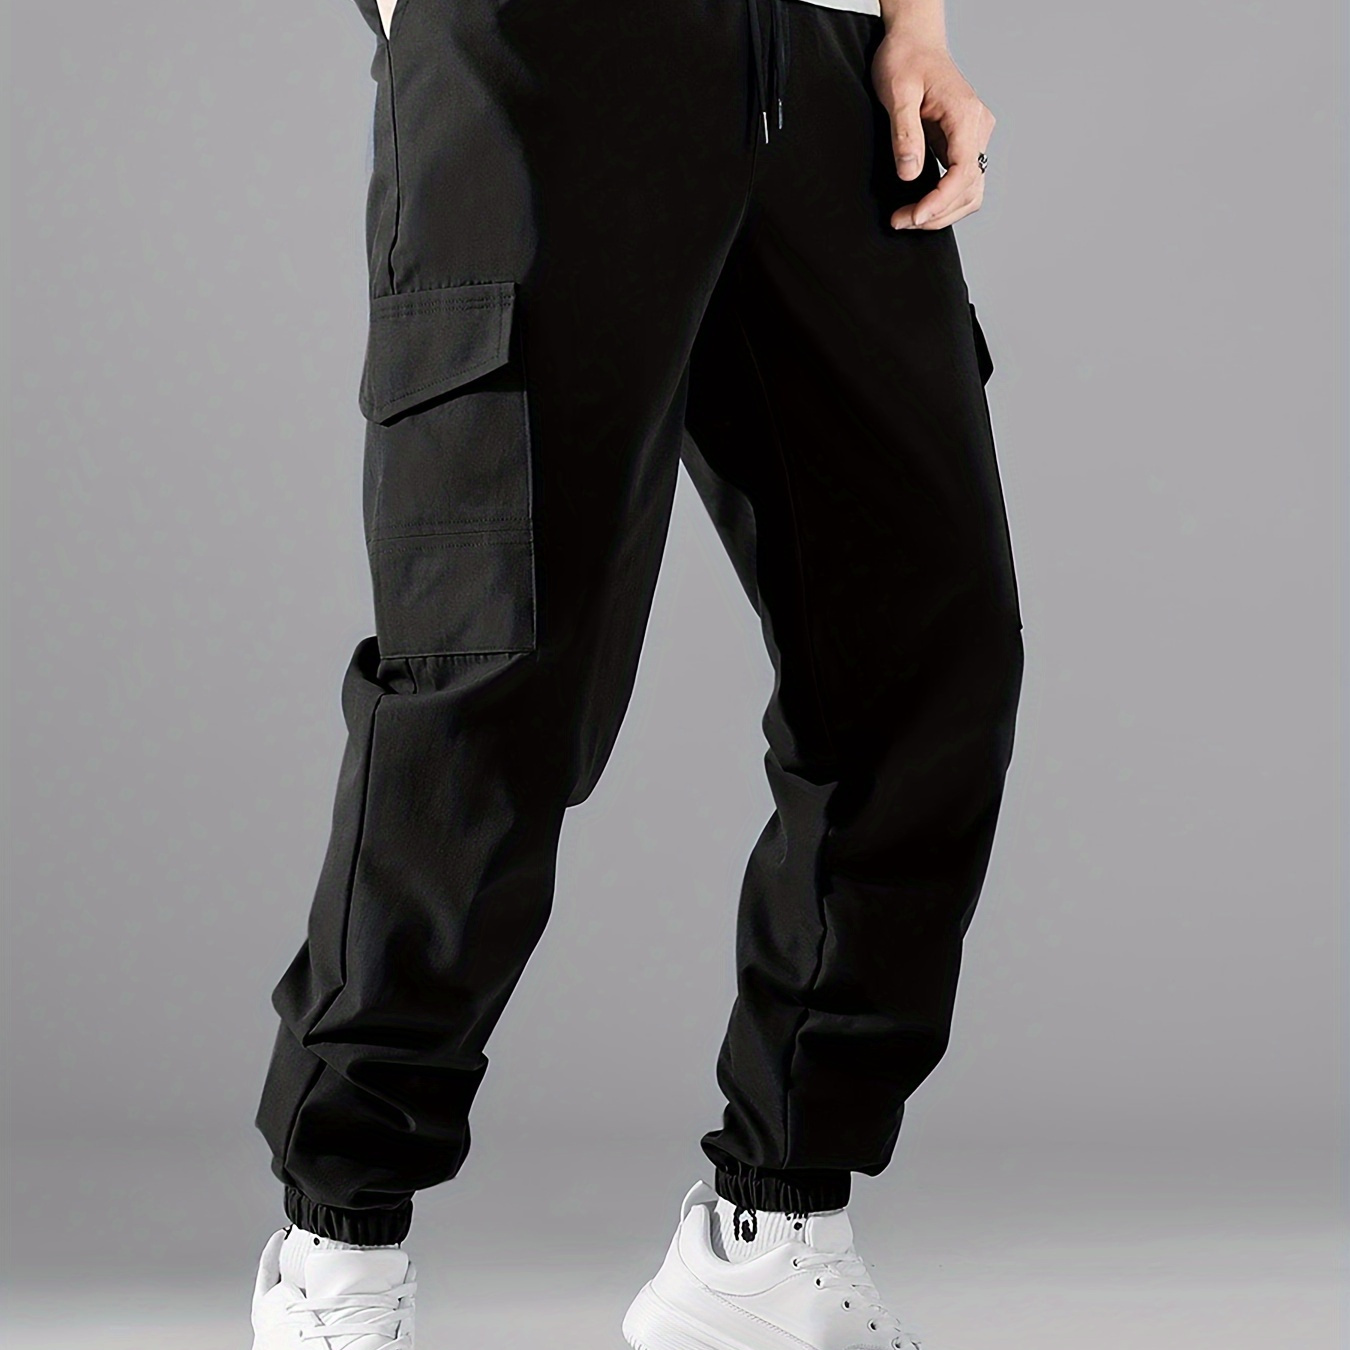 

Men's Stylish Solid Pants With Multi-pockets, Casual Breathable Drawstring Joggers For Spring Fall Outdoor Activities